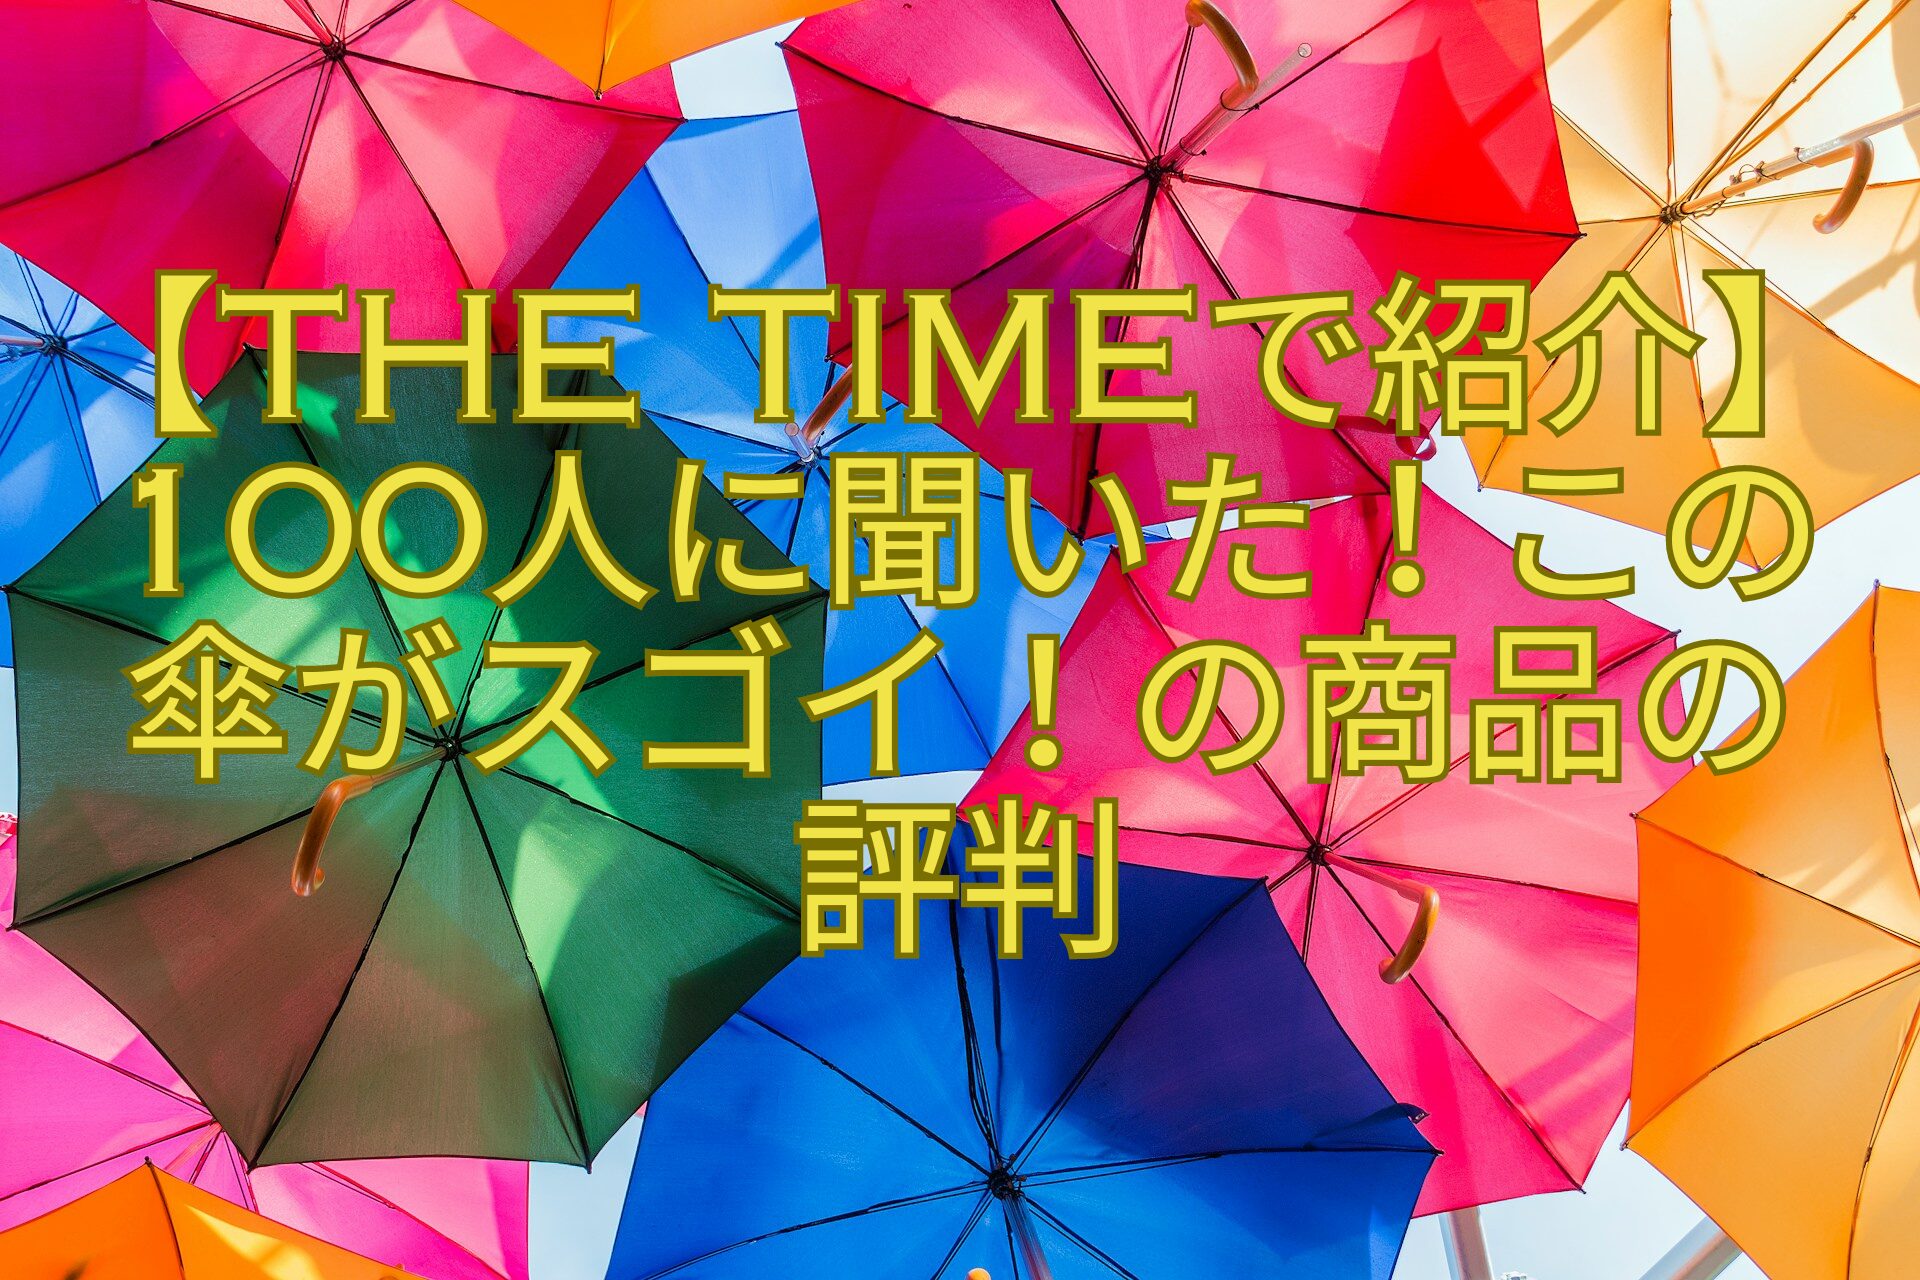 【THE-TIMEで紹介】100人に聞いた！この傘がスゴイ！の商品の評判